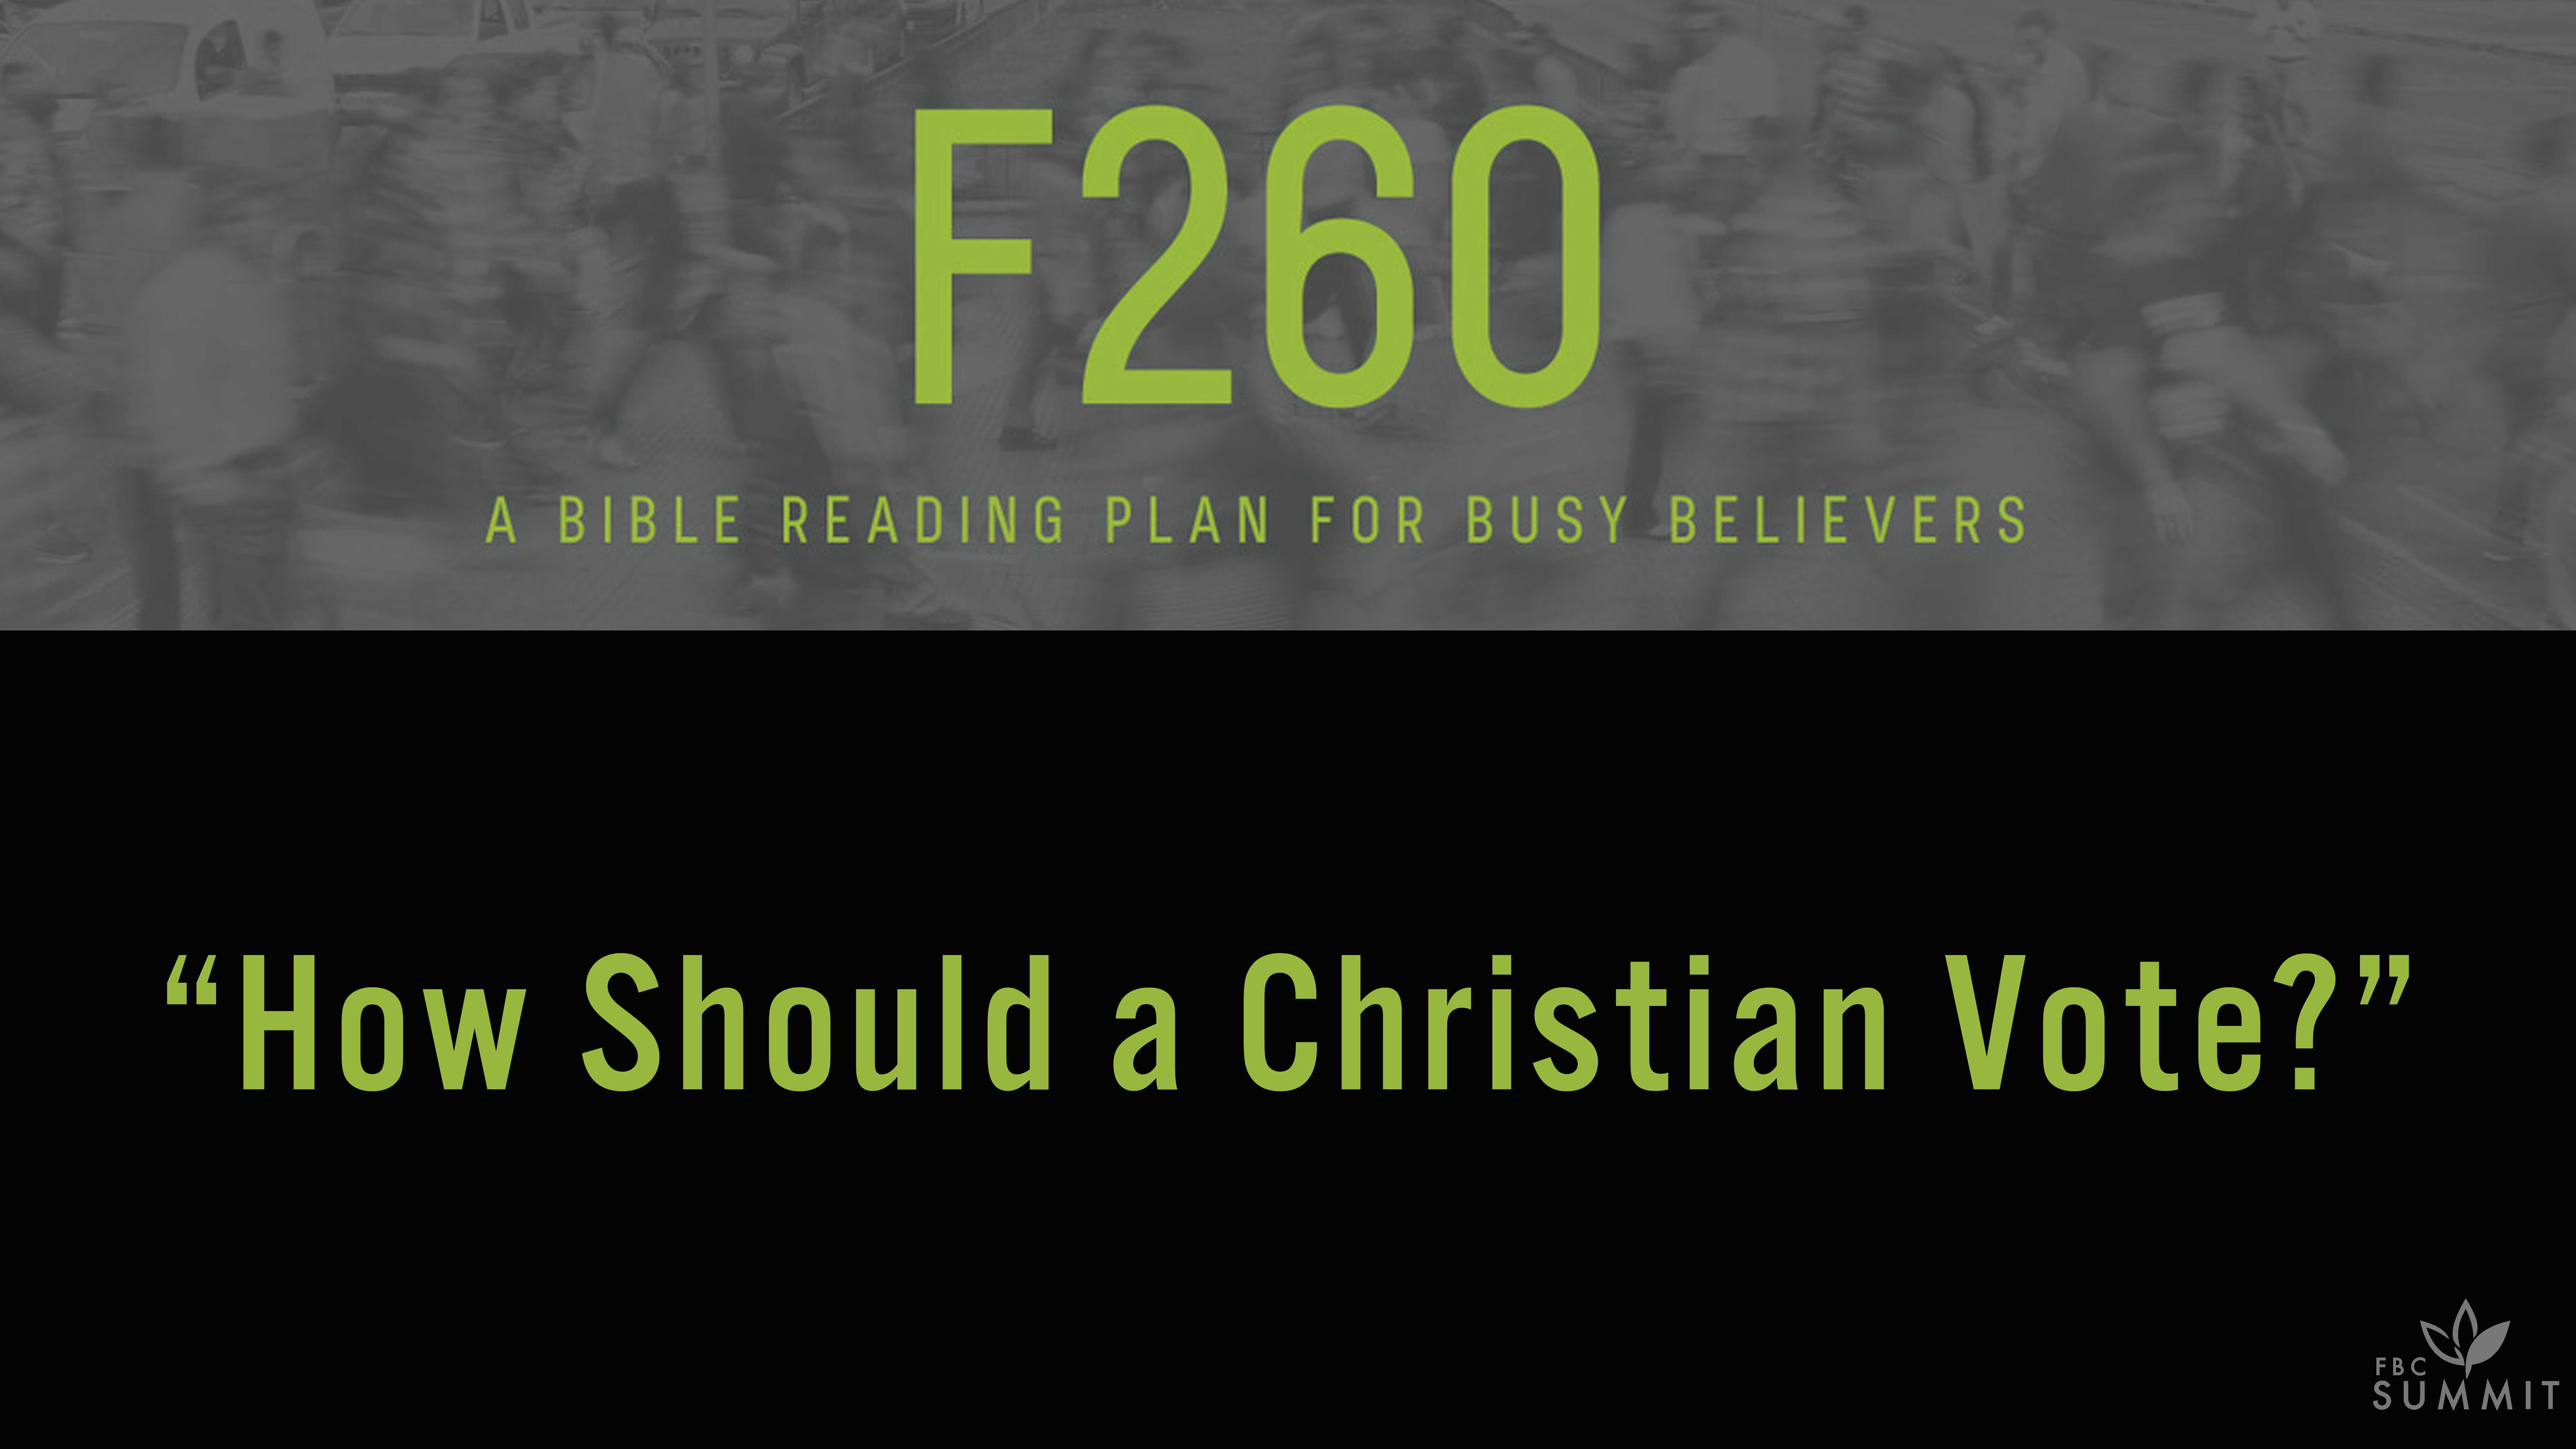 F260: "How Should a Christian Vote?"